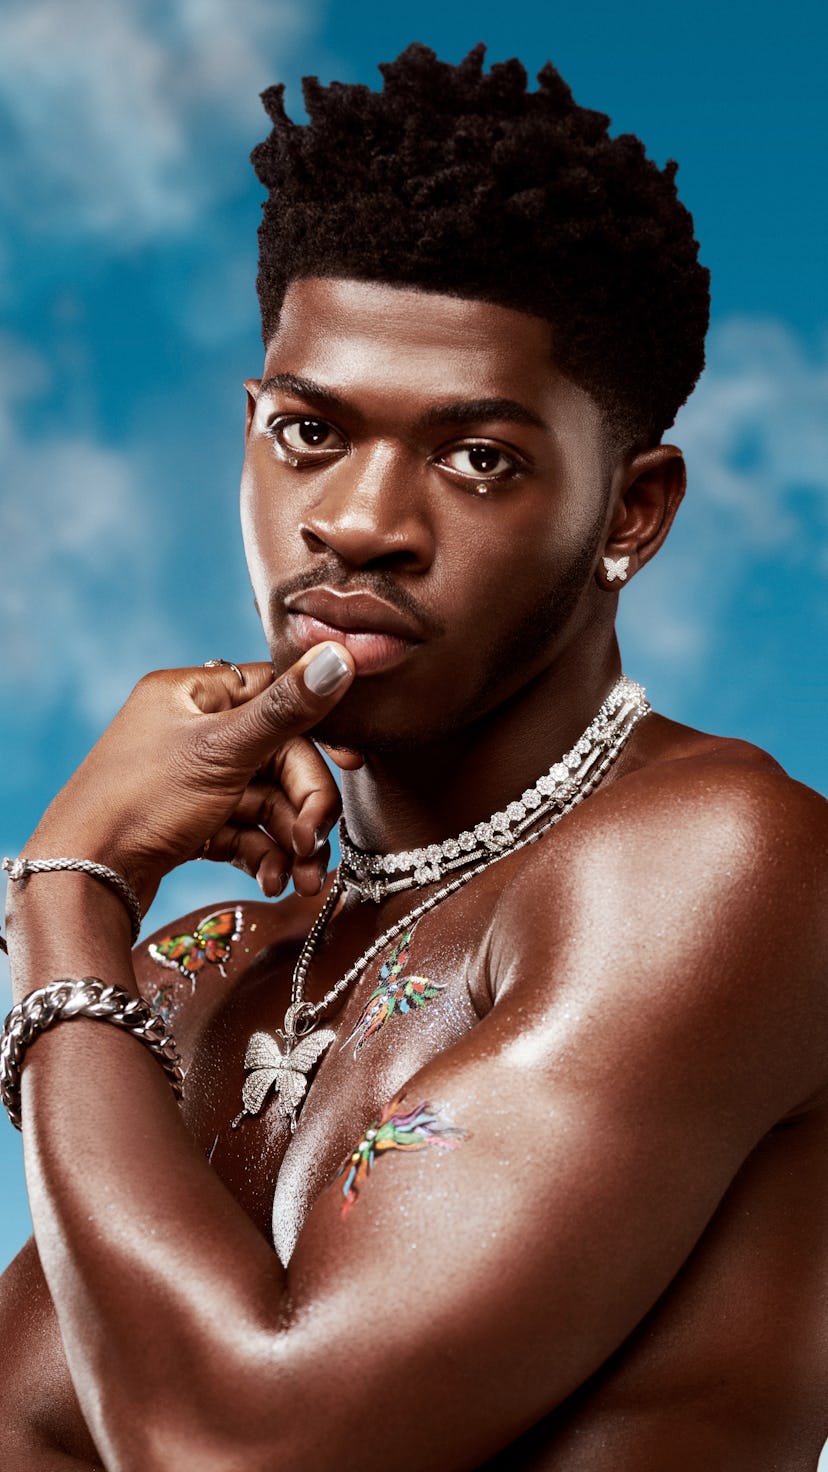 Lil Nas X released his highly-anticipated debut album, 'Montero,' last Friday.